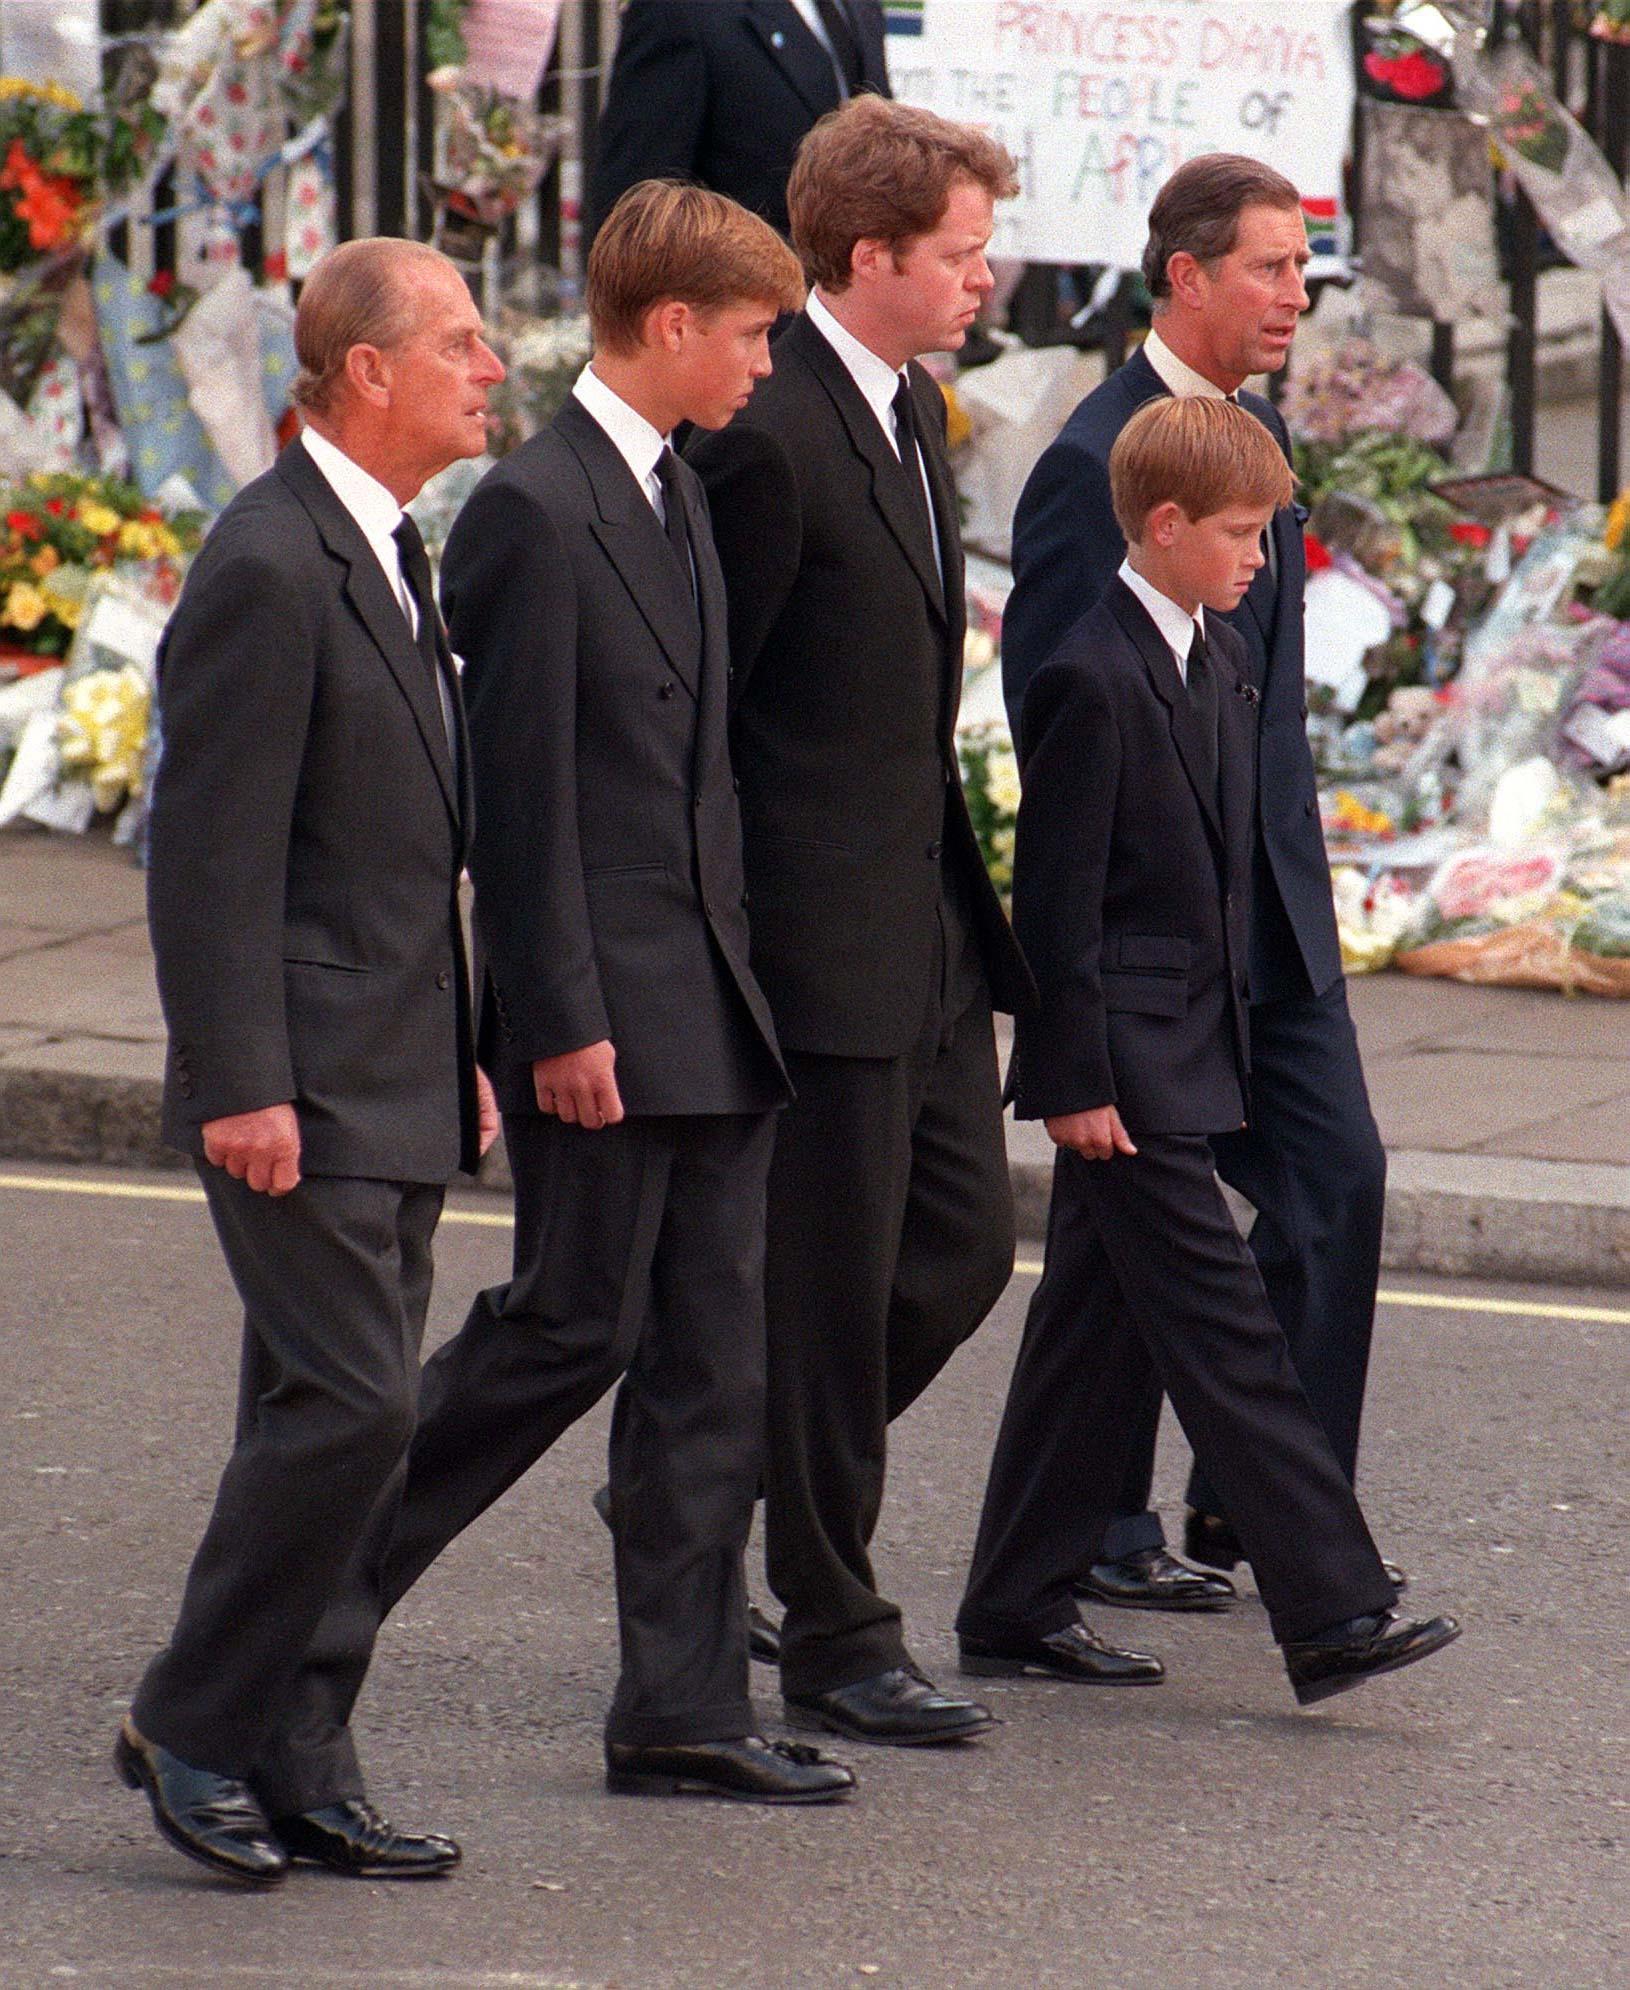 The Duke of Edinburgh, Prince William, Earl Spencer, Prince Harry and the Prince of Wales following the coffin of Diana, Princess of Wales, to Westminster Abbey for her funeral service [L-R] in September 1997 | Source: Getty Images